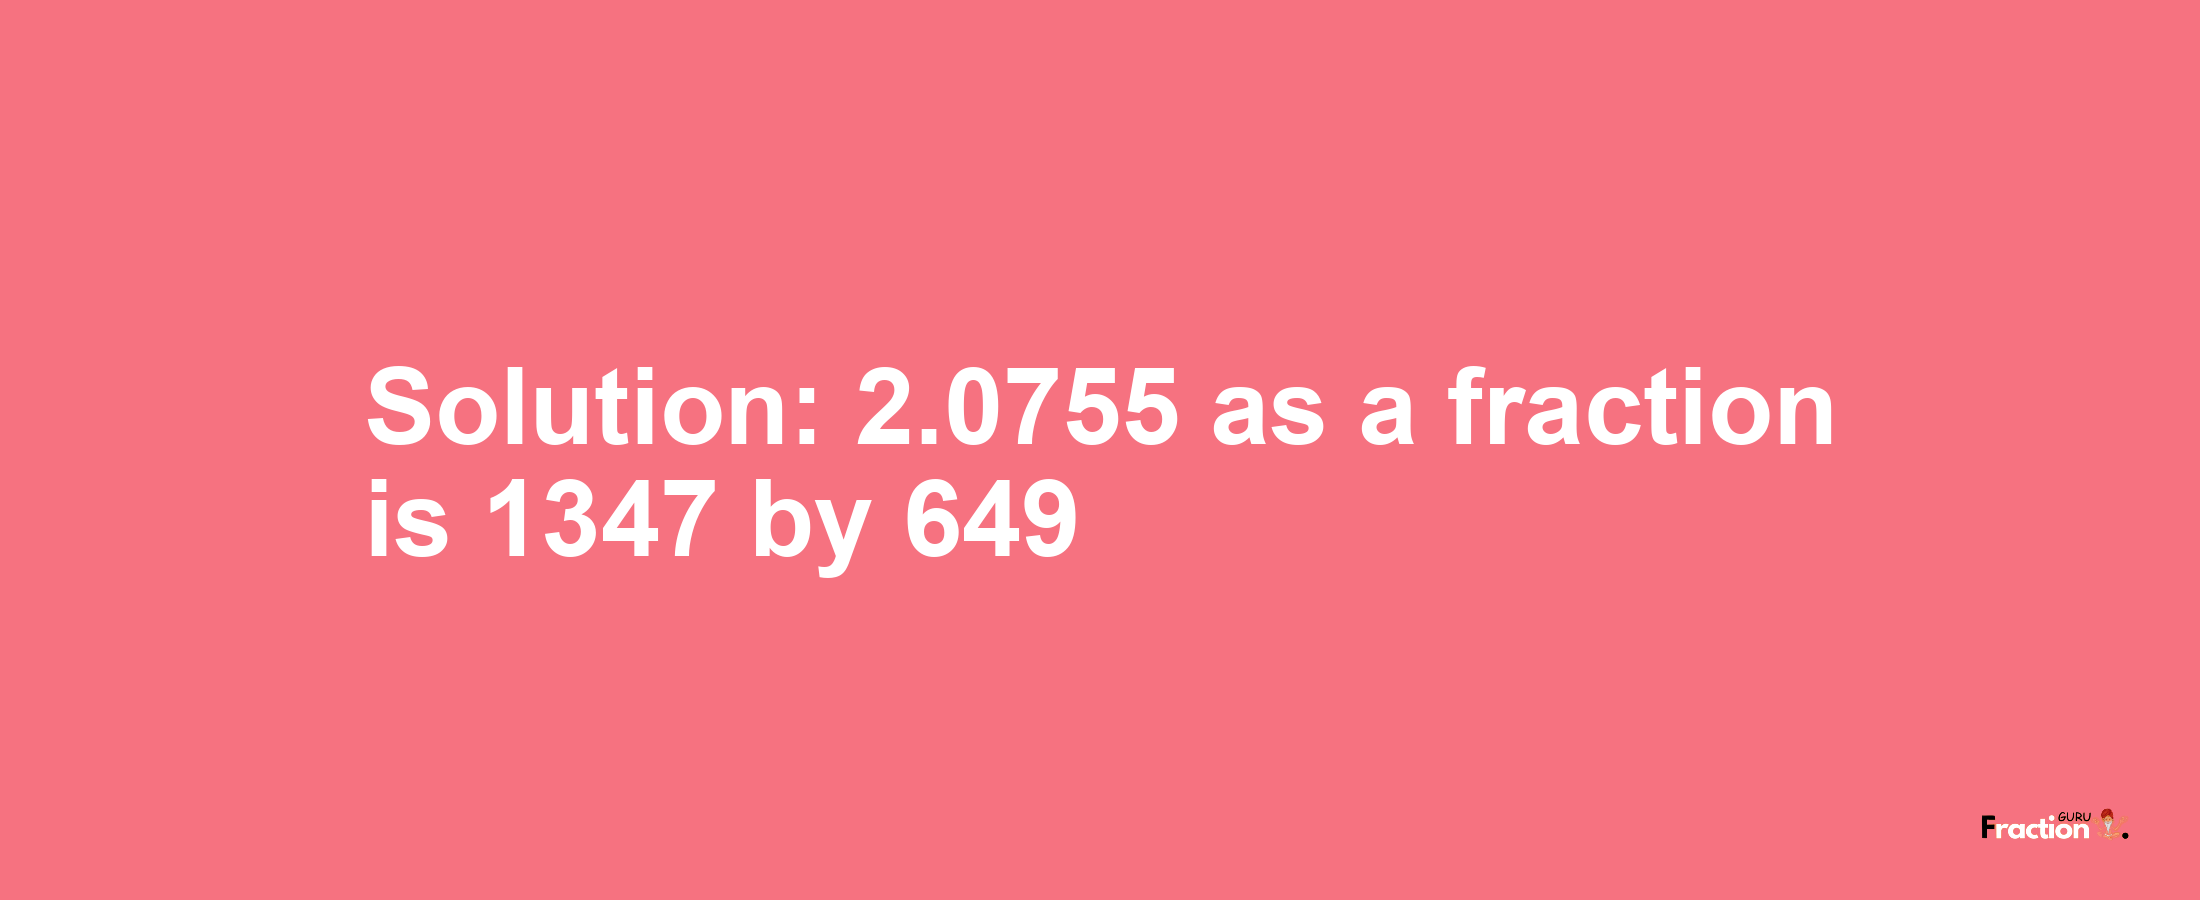 Solution:2.0755 as a fraction is 1347/649